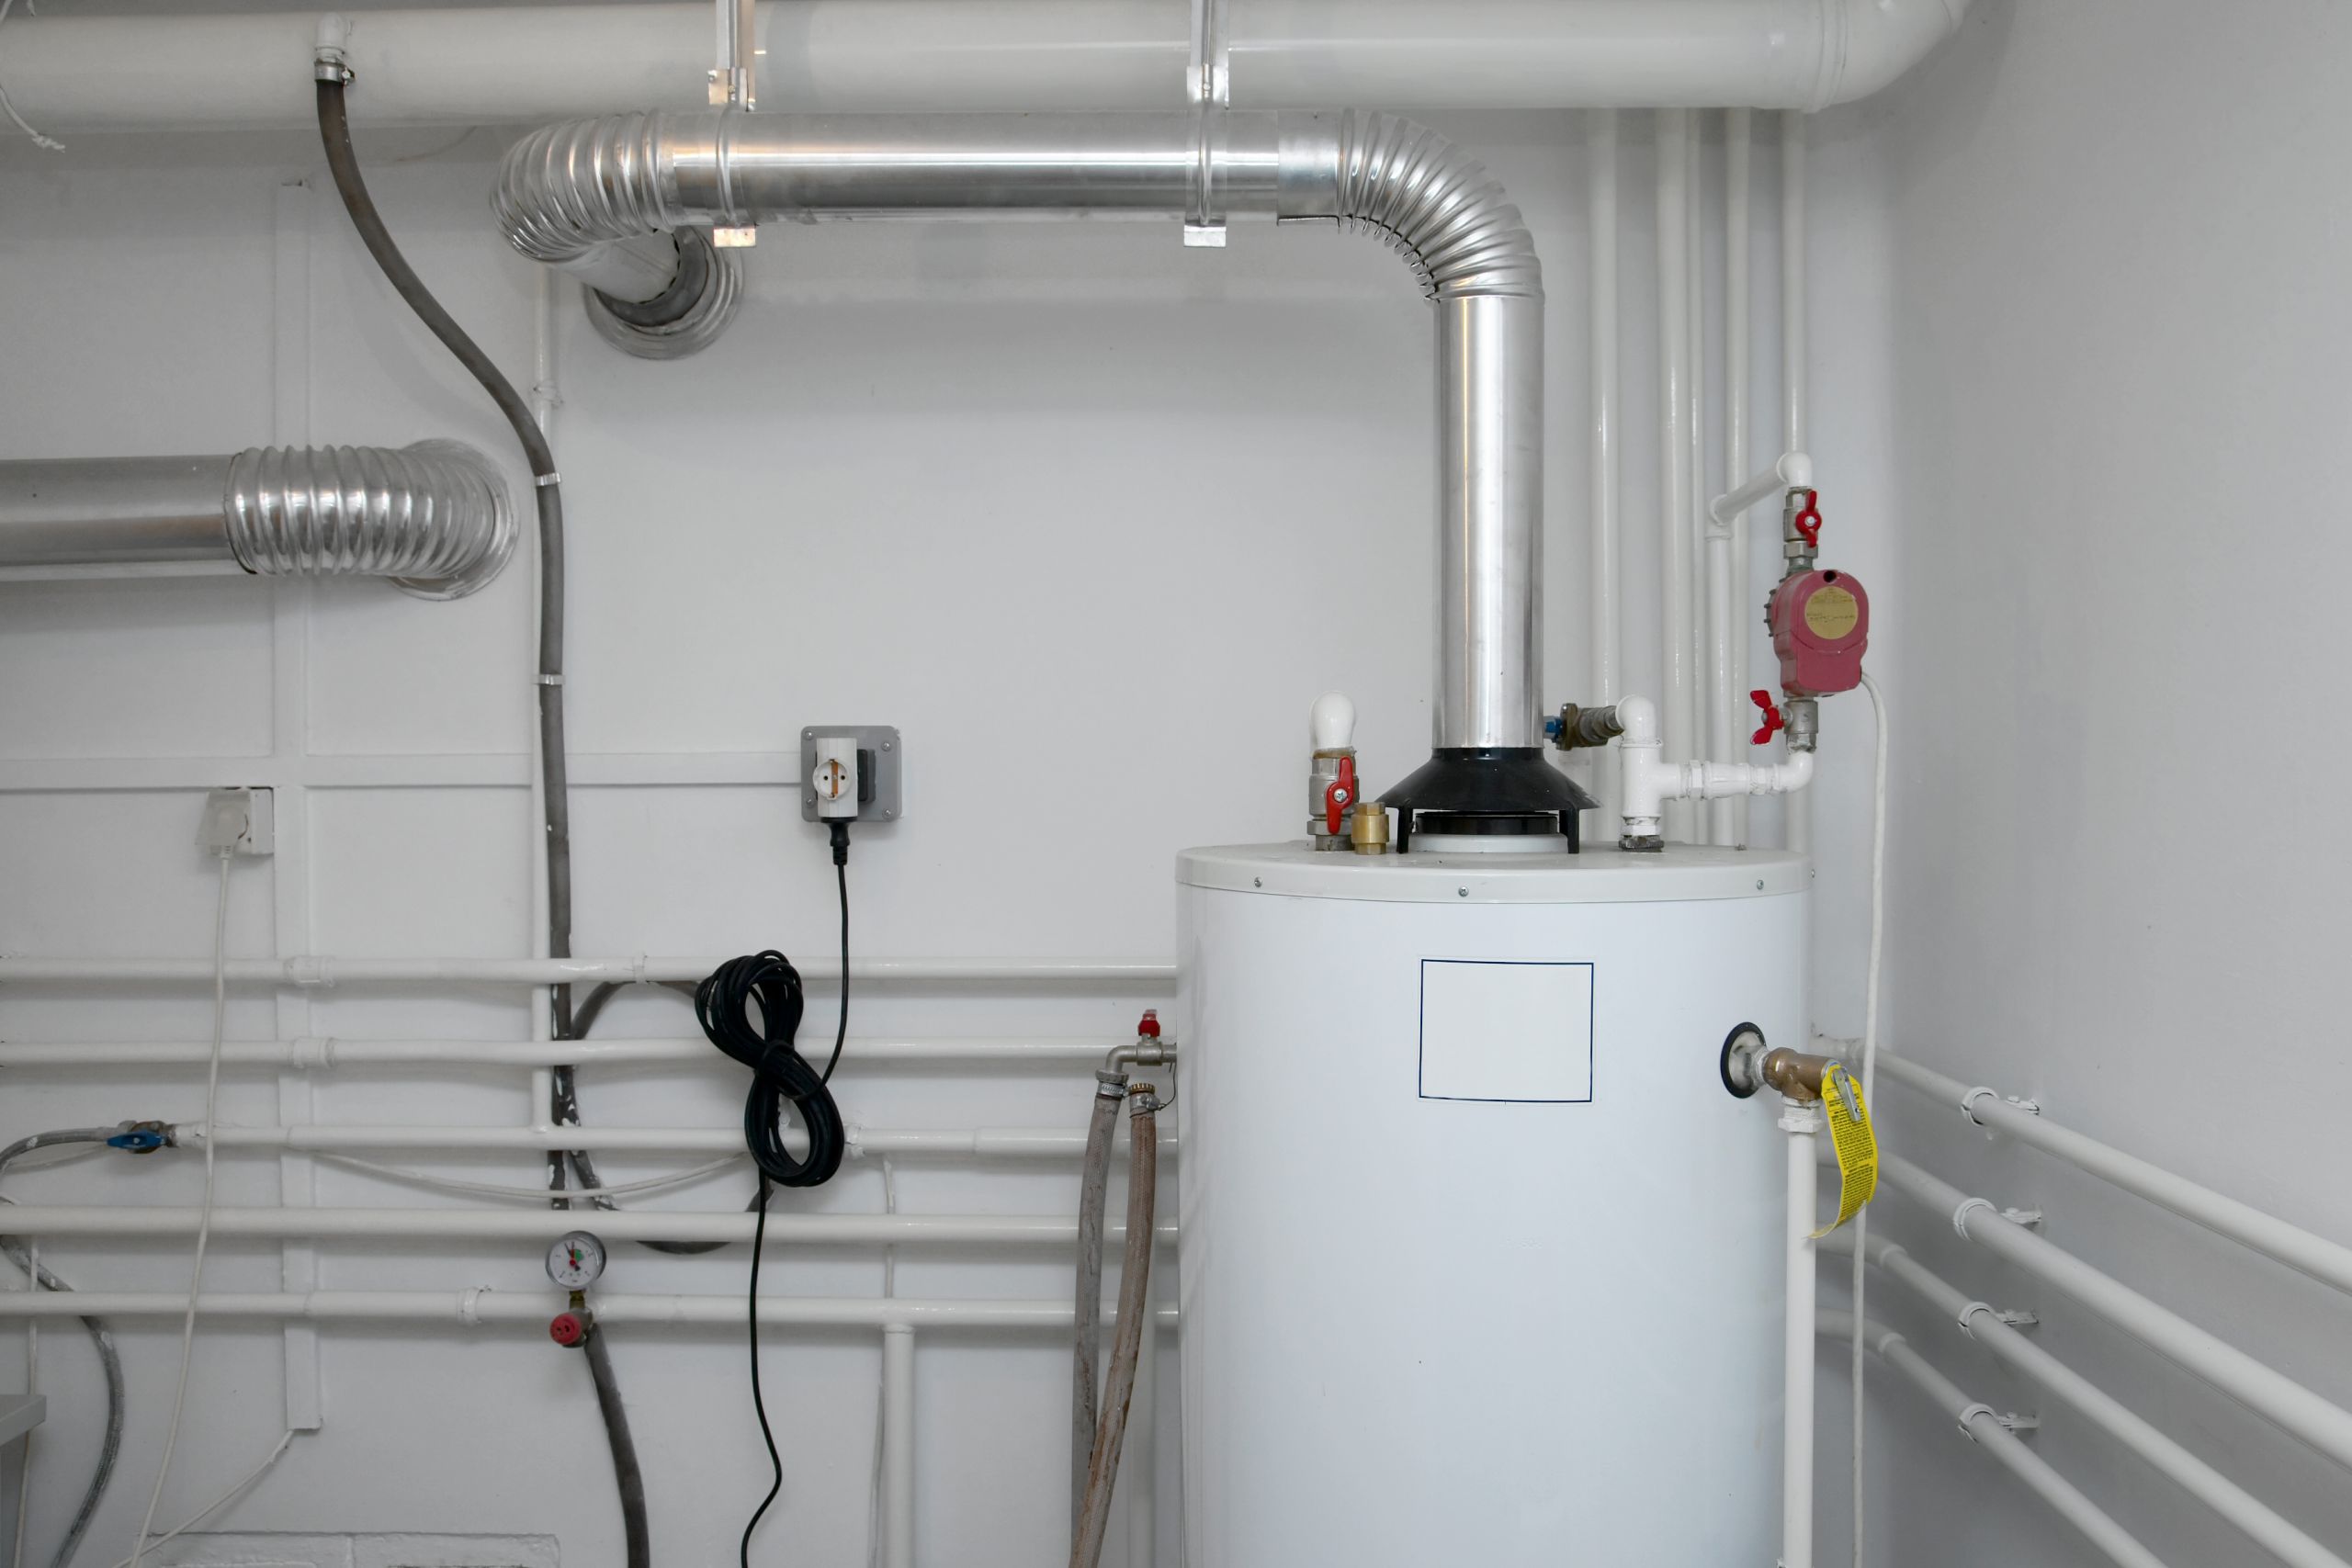 Hot water system